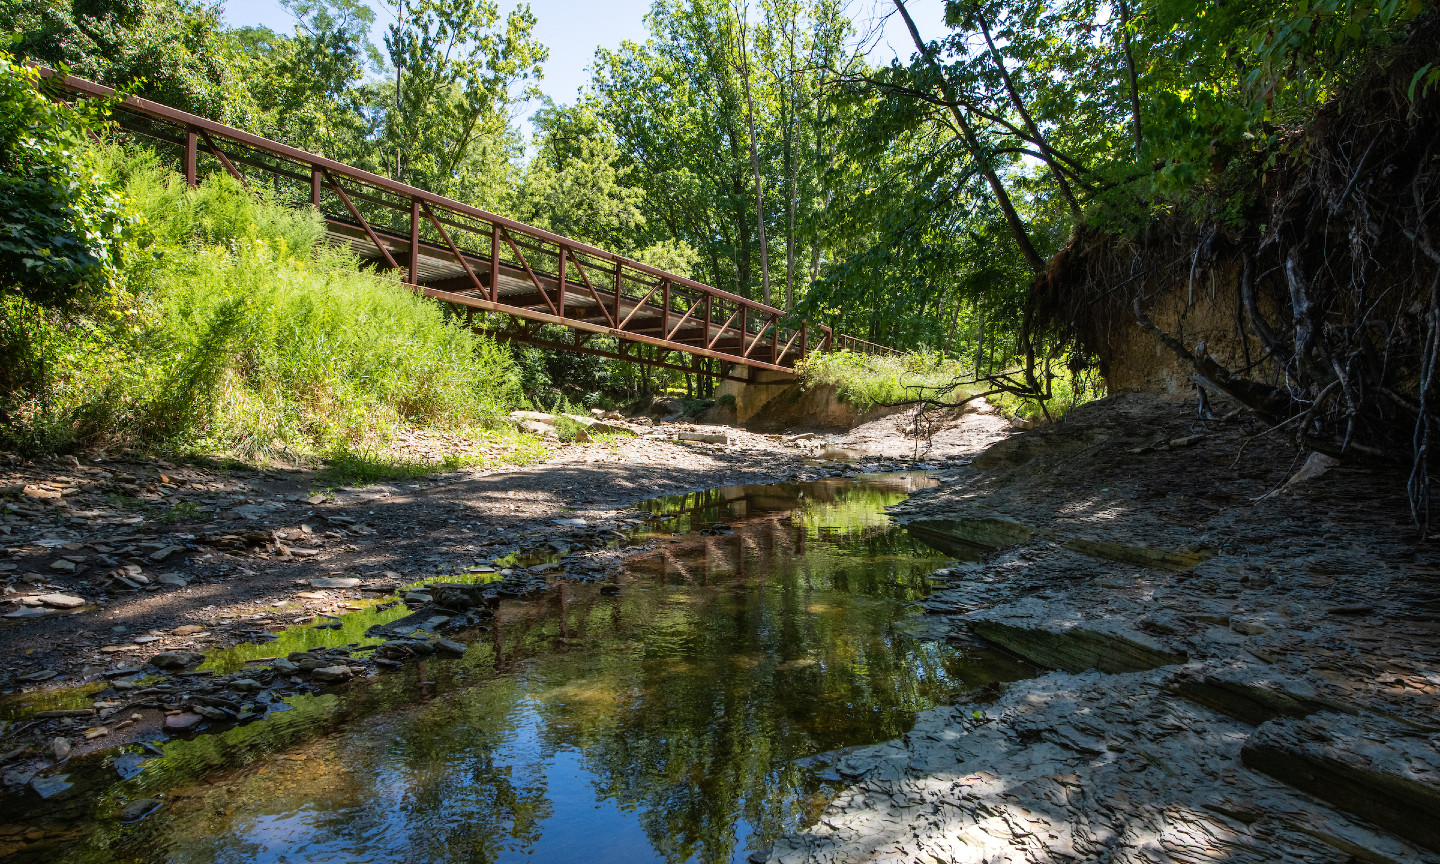 Connect with Cleveland Metroparks